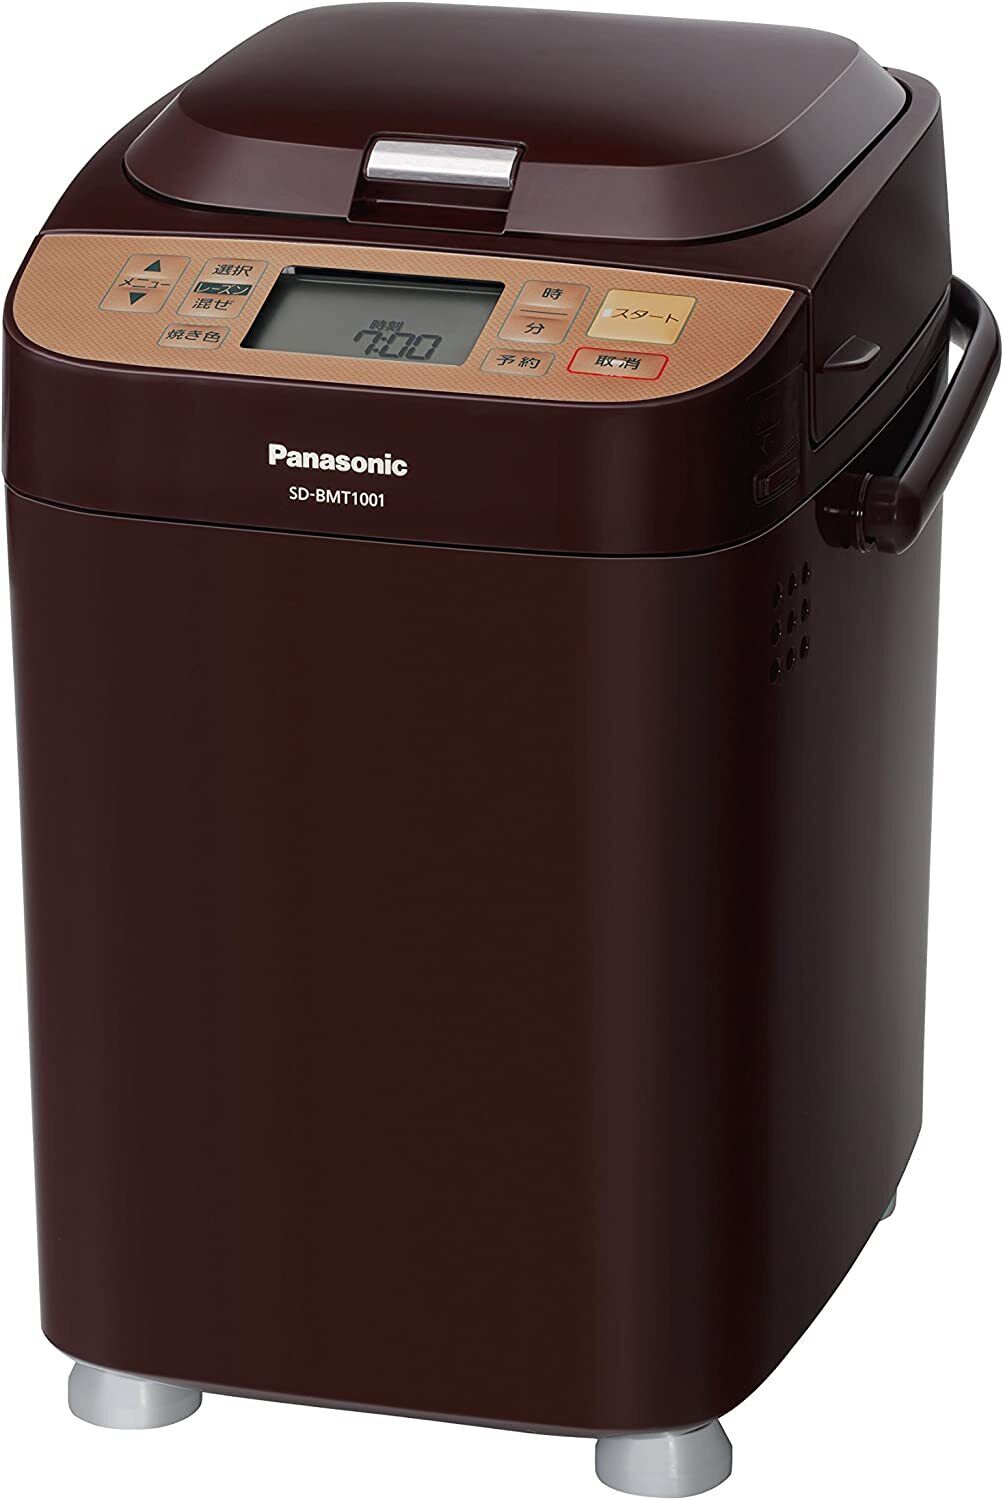 SD-BMT1001-T Panasonic Home Bakery Brown SD-BMT1001-T 100V